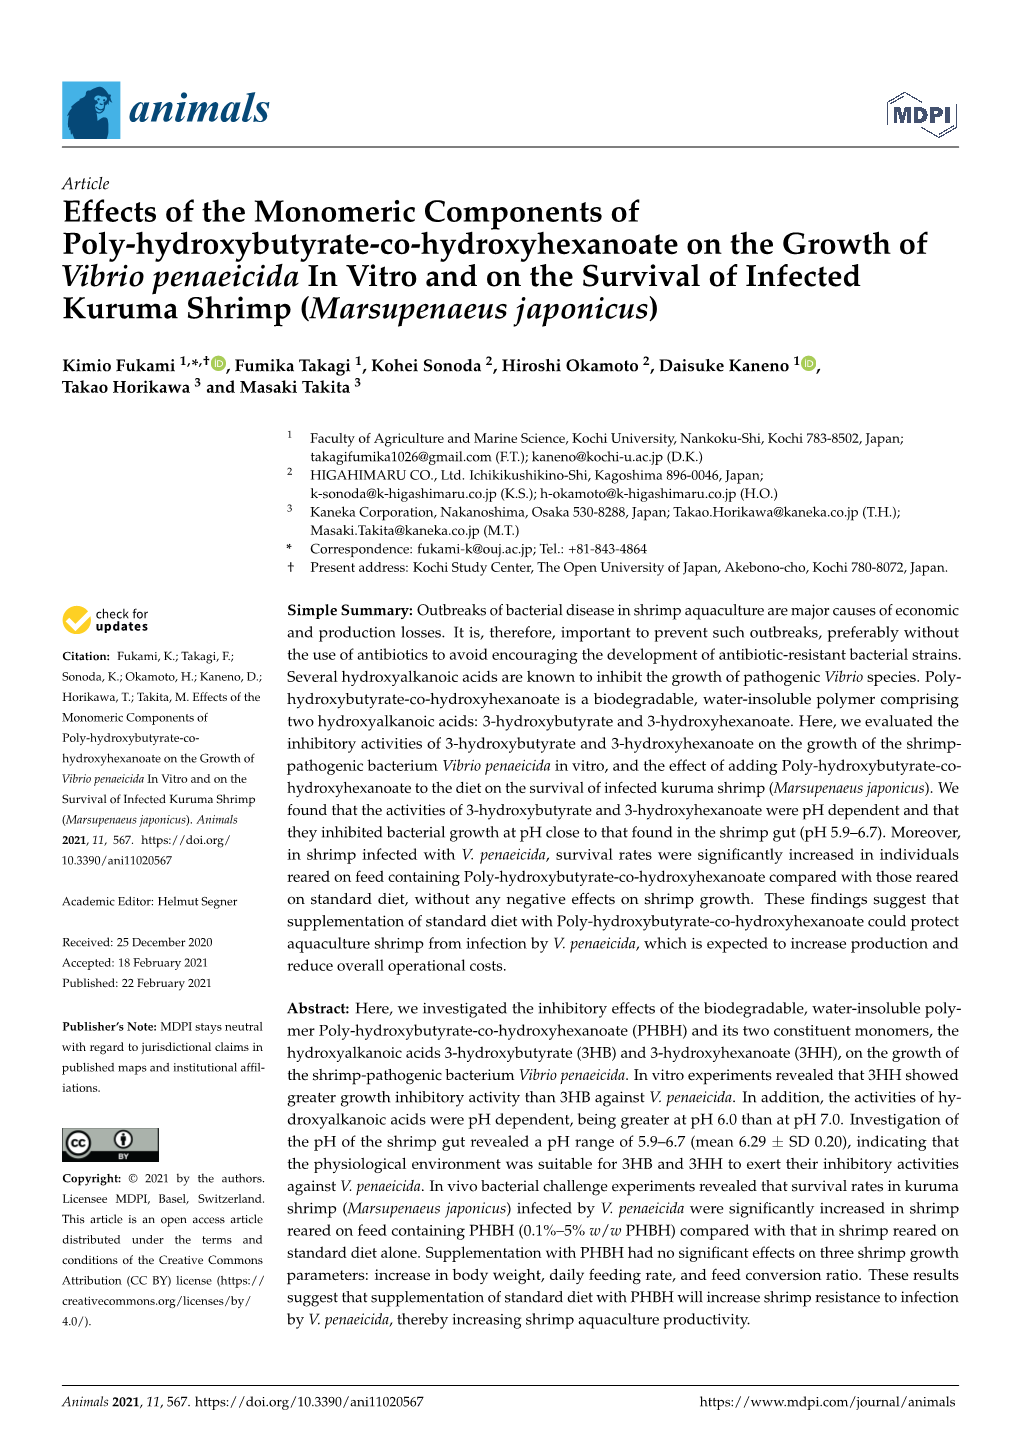 Effects of the Monomeric Components of Poly-Hydroxybutyrate-Co-Hydroxyhexanoate on the Growth of Vibrio Penaeicida in Vitro